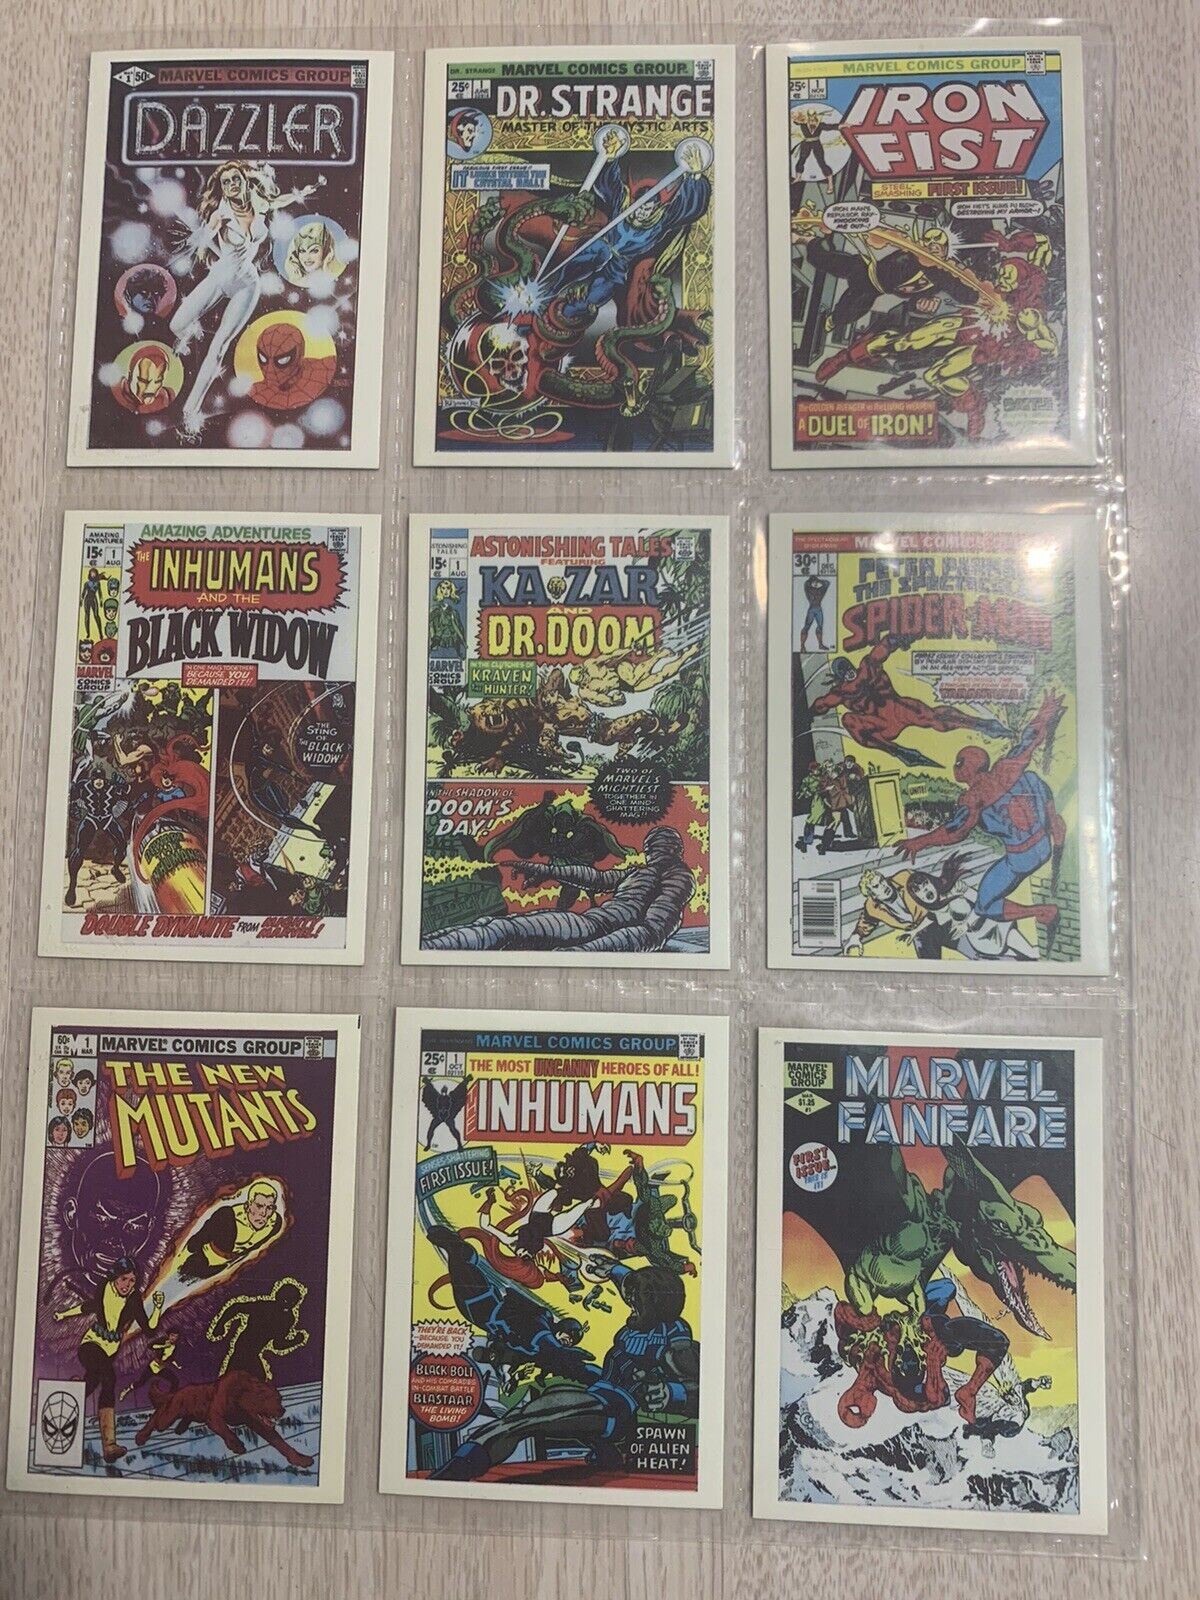 MARVEL SUPERHEROES FIRST ISSUE COVERS 9 CARDS NM 1984 ALL # 1’S EARLY MARVELS